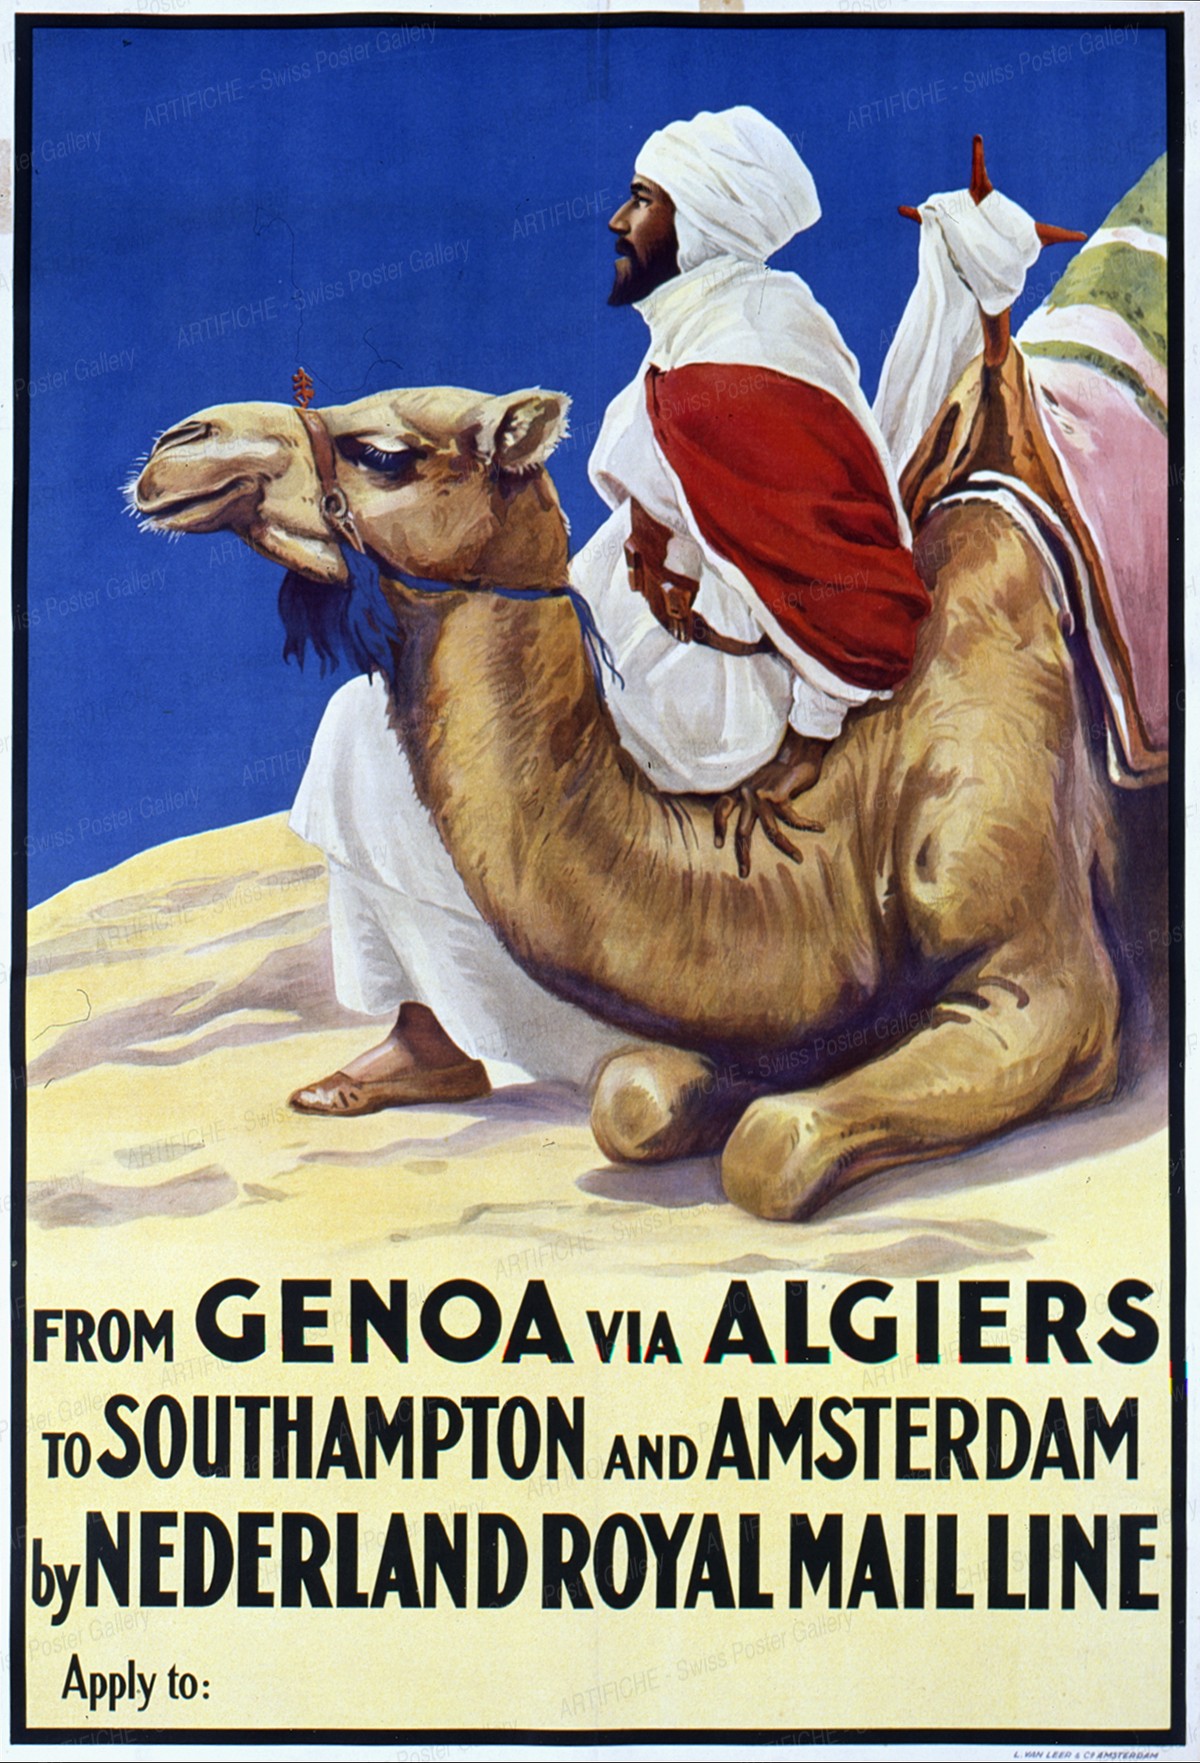 From Genoa via Algiers to Southampton and Amsterdam by Nederland Royal Mailline, Artist unknown